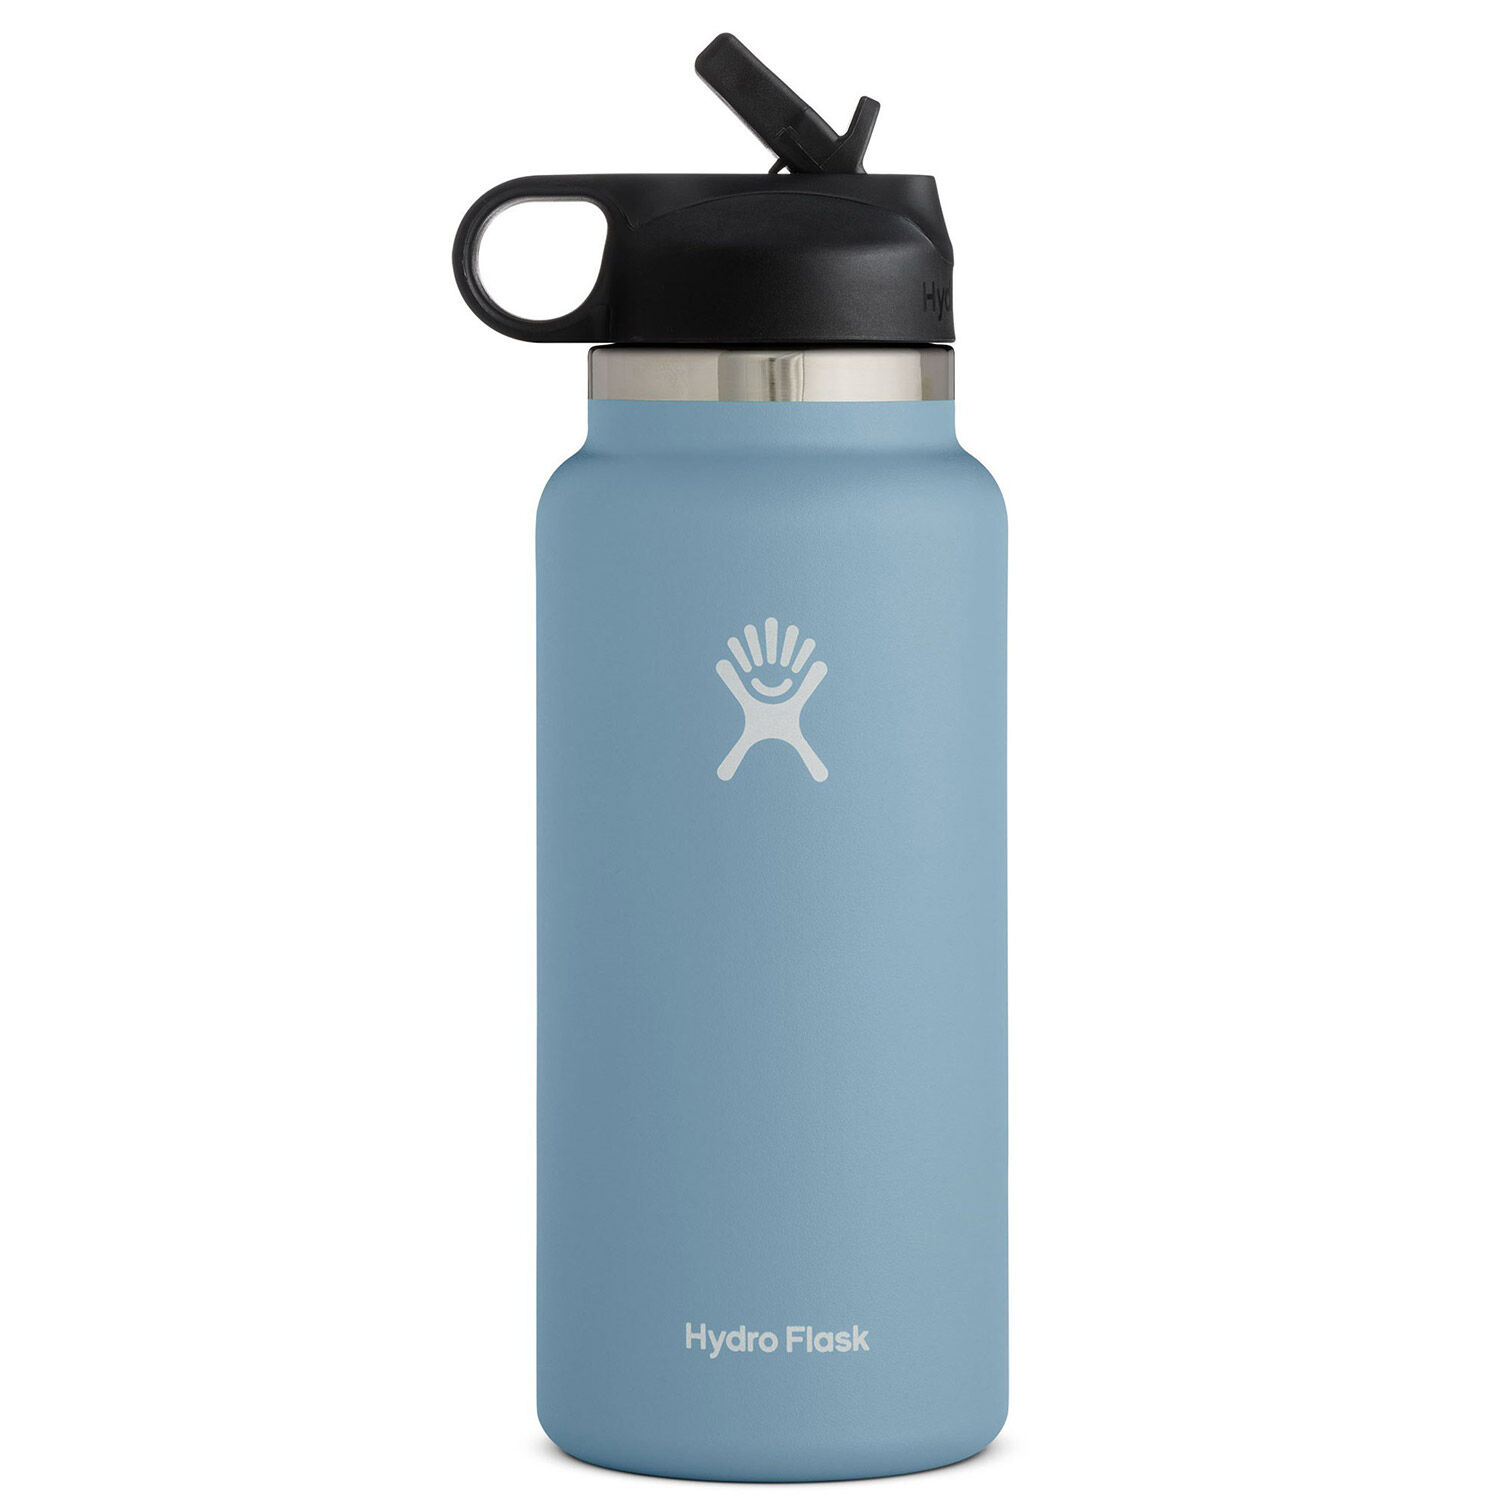 Hydro Flask Multi-functional Replace Plastic Lid For Hydro Flask Wide Mouth Water Bottle 